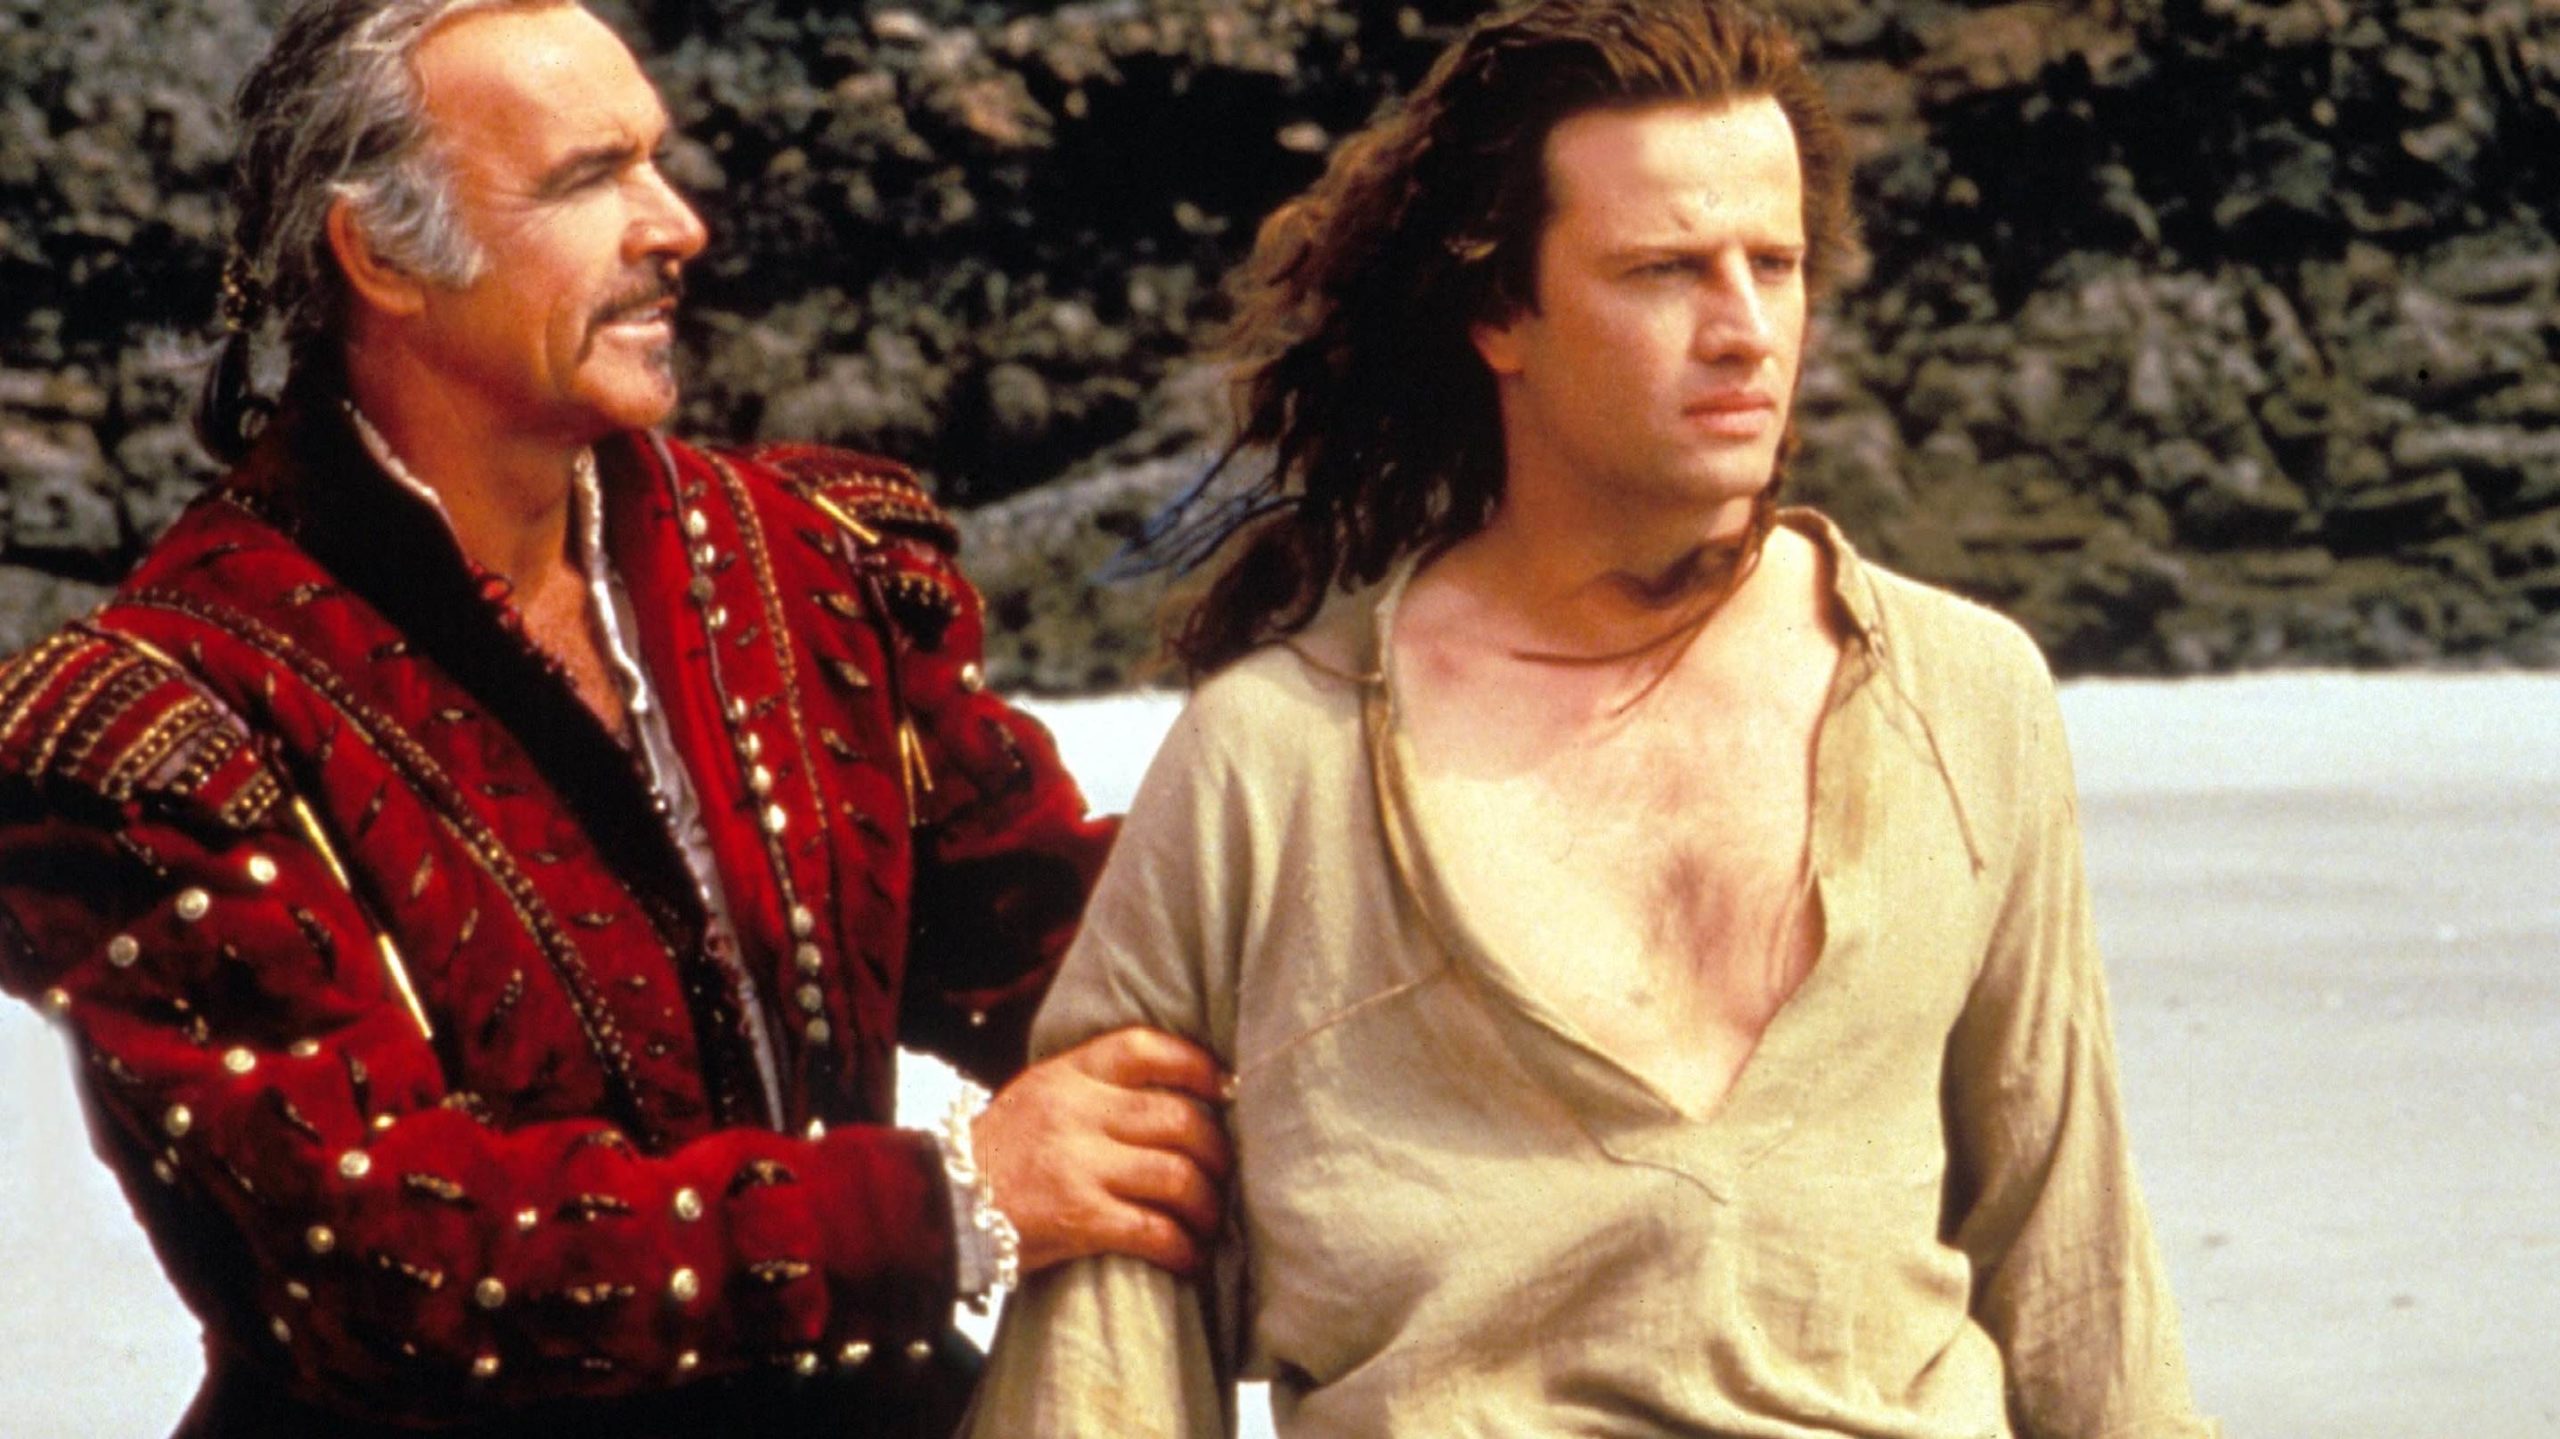 Double Connery! Here he is in Highlander. (Photo: Lionsgate)